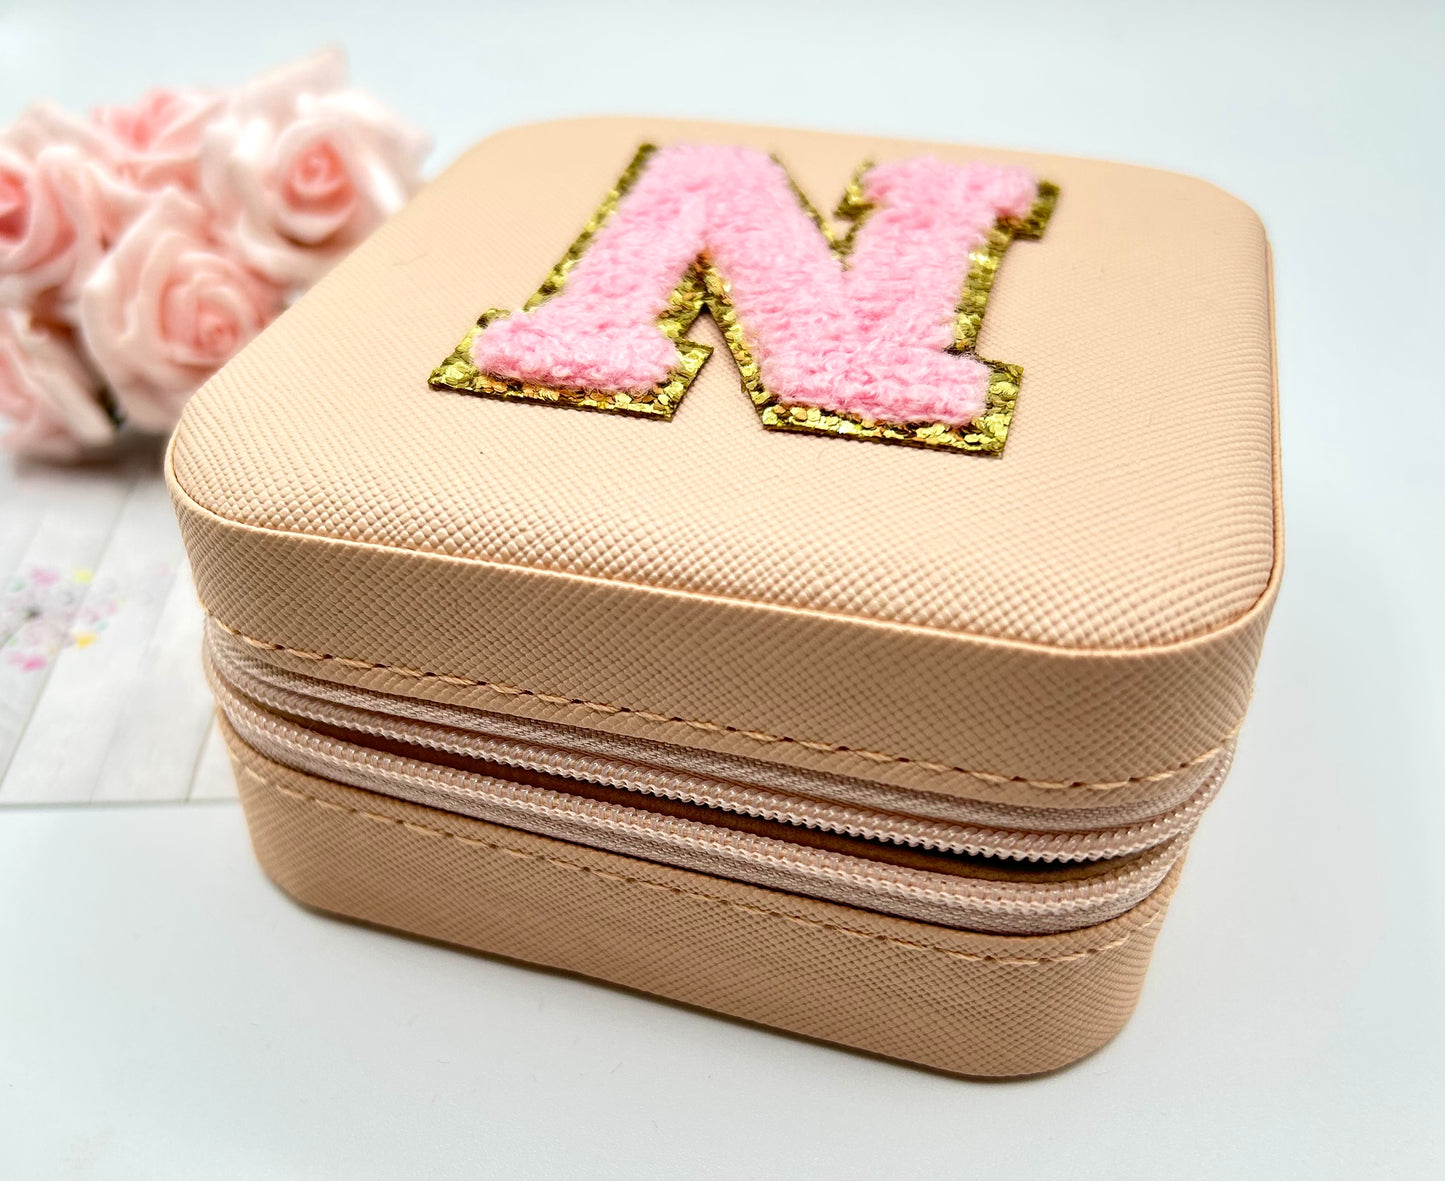 Load image into Gallery viewer, Personalised Initial Jewellery Box
